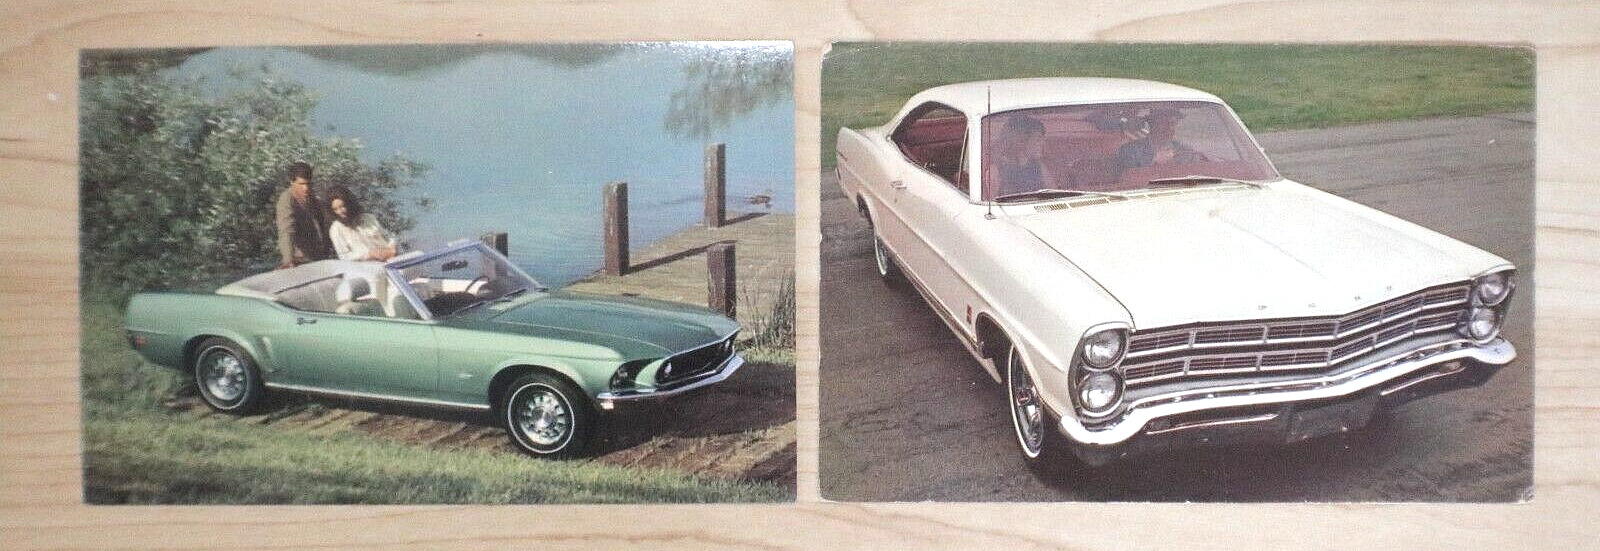 1969 ford mustang convertible 1967 ford galaxie 500 2 door dealer post cards